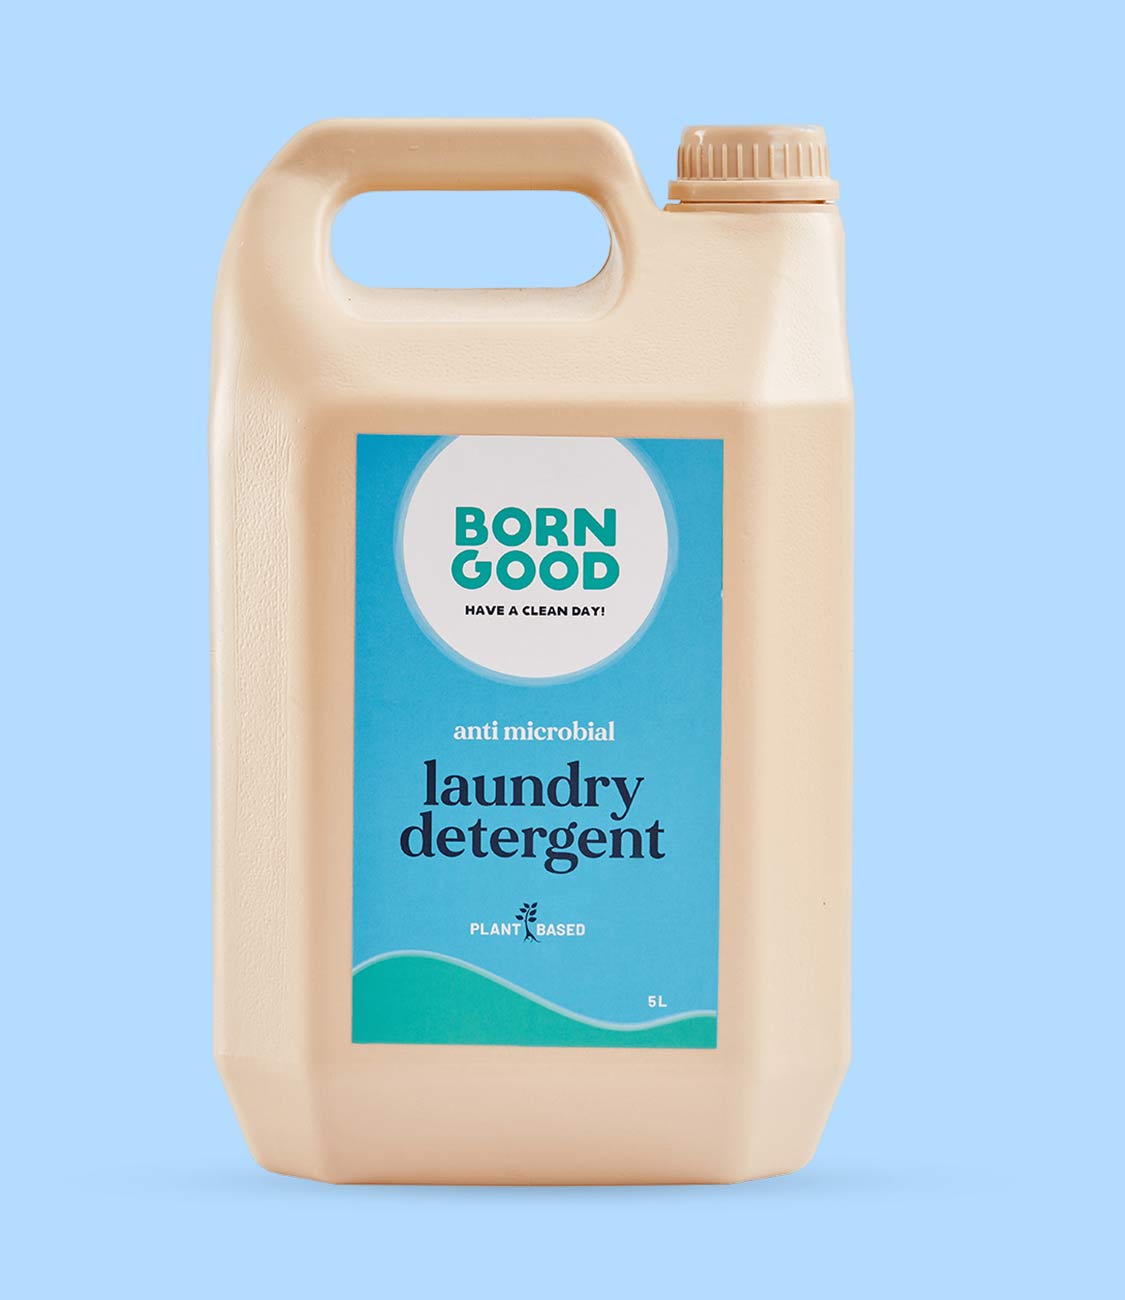 Born Good Plant-based Anti Microbial Laundry Detergent - 5 L Can